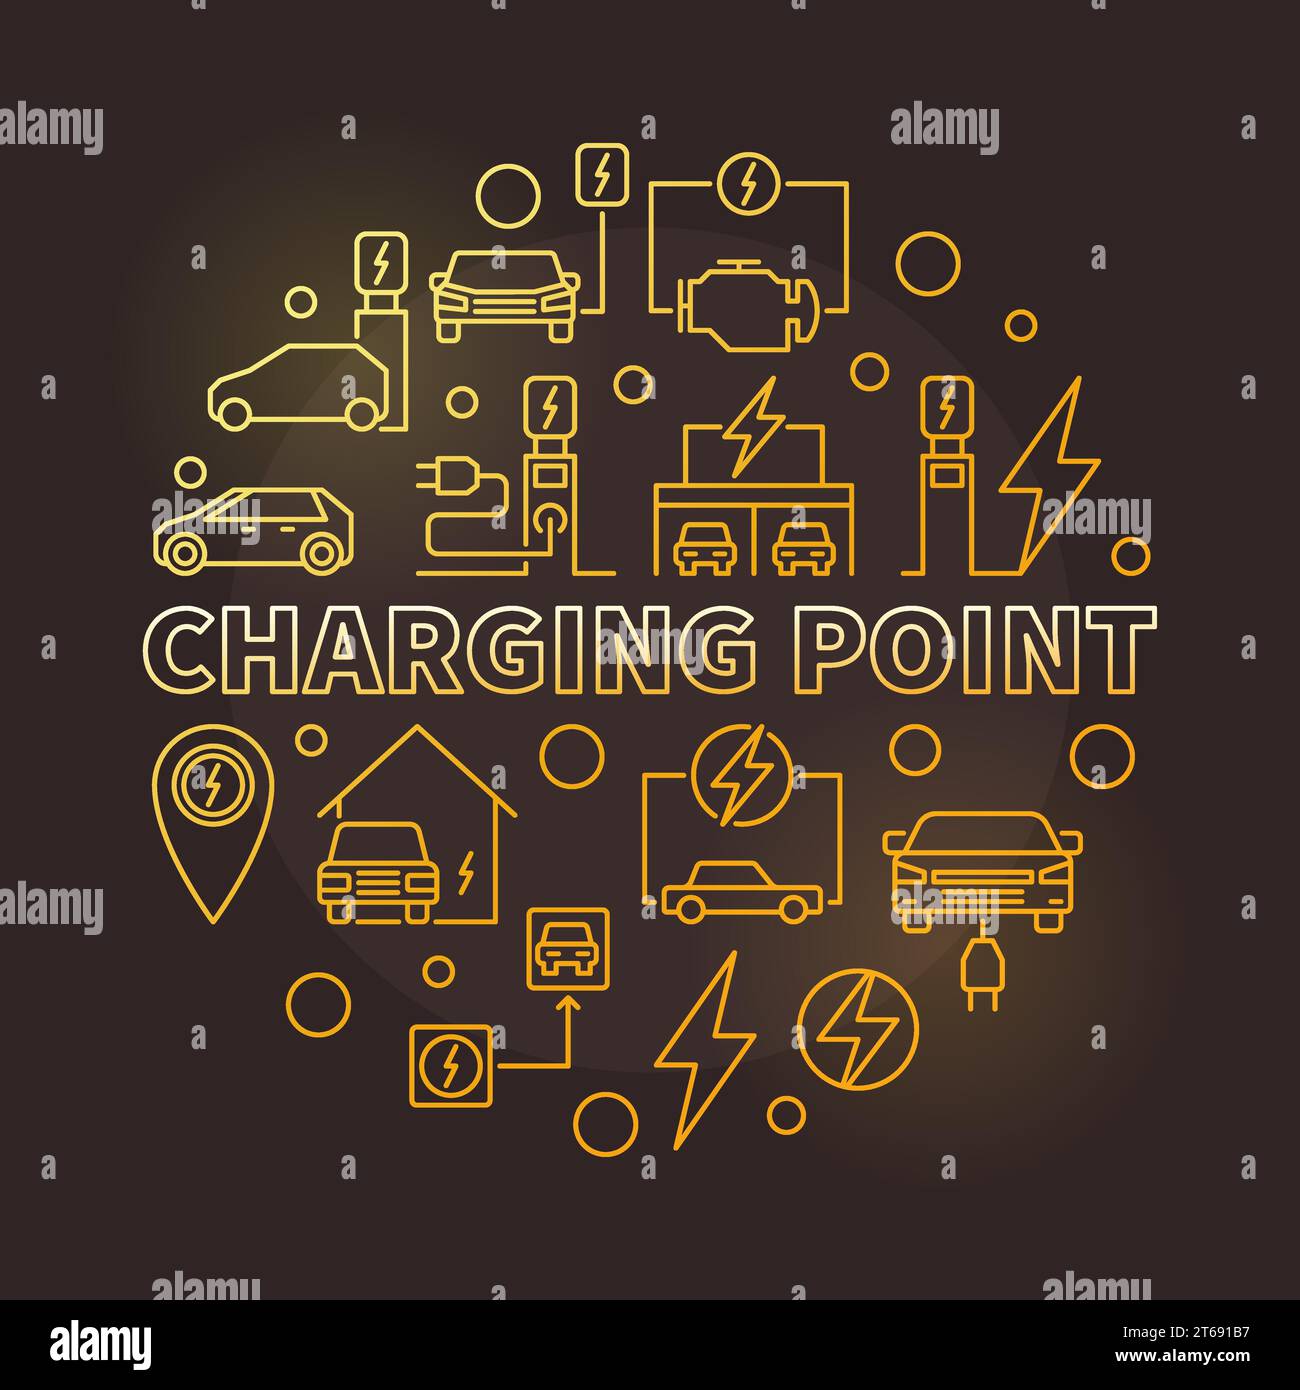 Charging point round vector golden illustration made with charging stations and electric cars outline icons on dark background Stock Vector